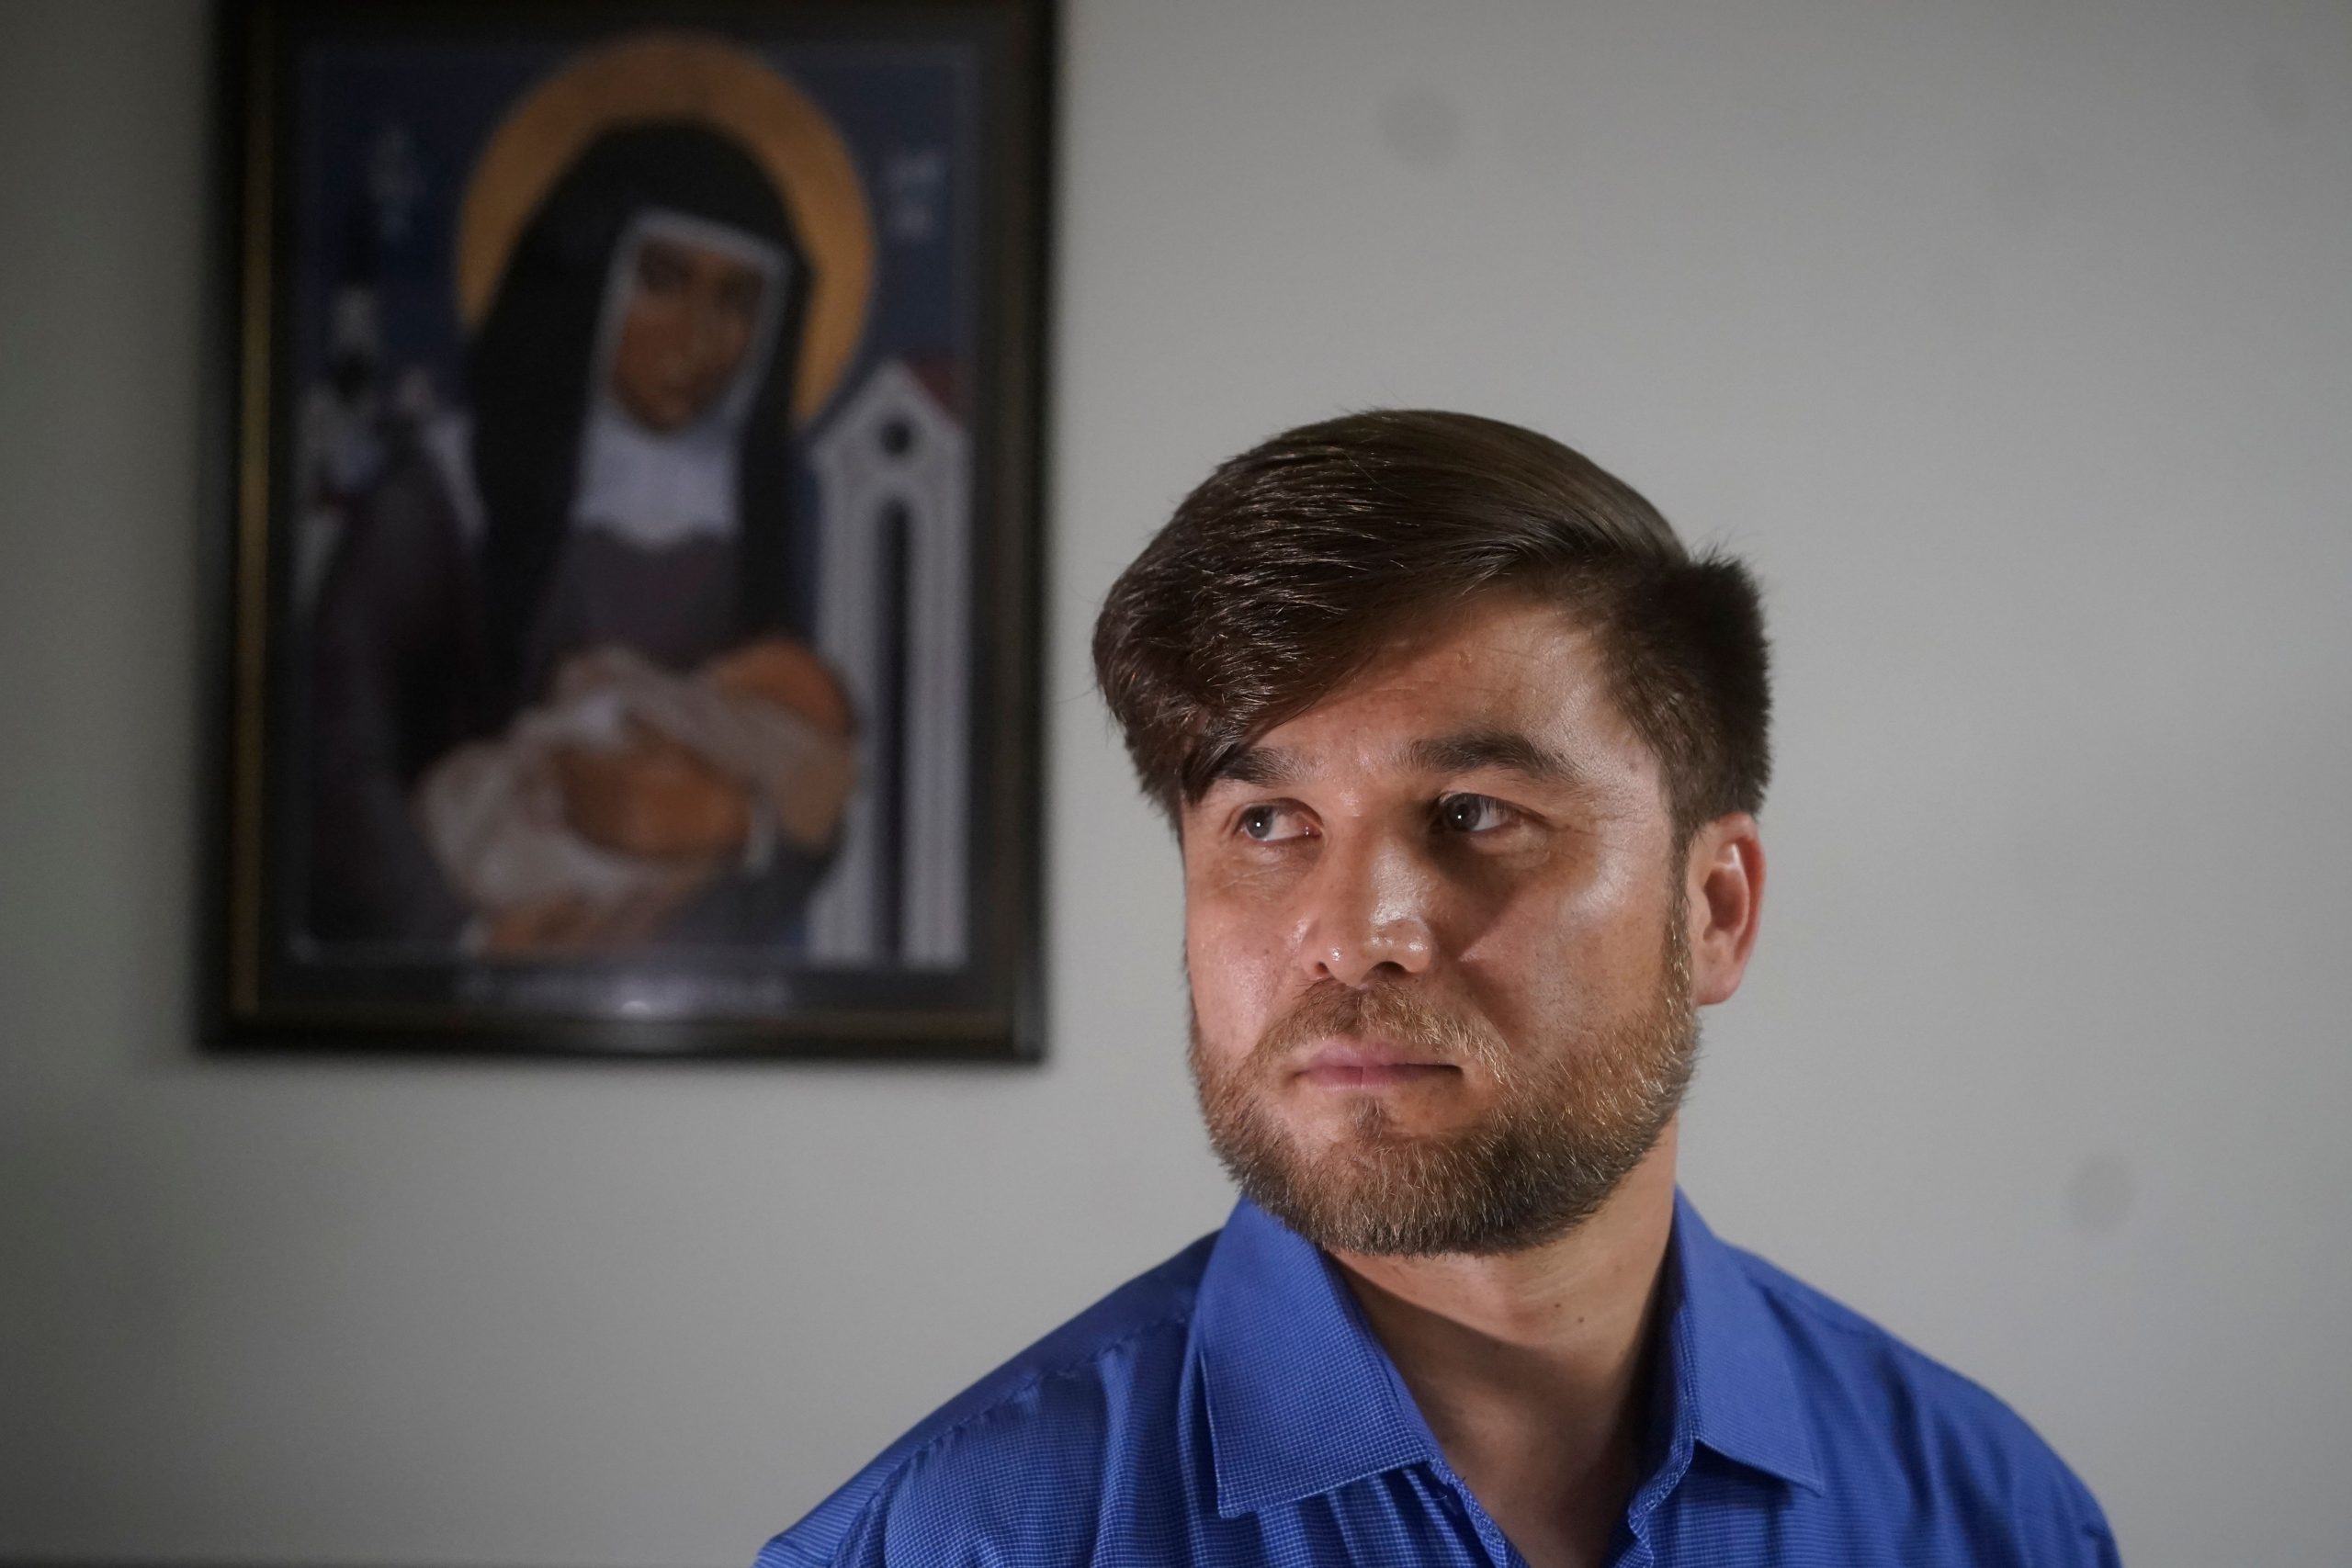 Story of Azim Kakaie, first Afghan refugee in Utah since the Taliban takeover